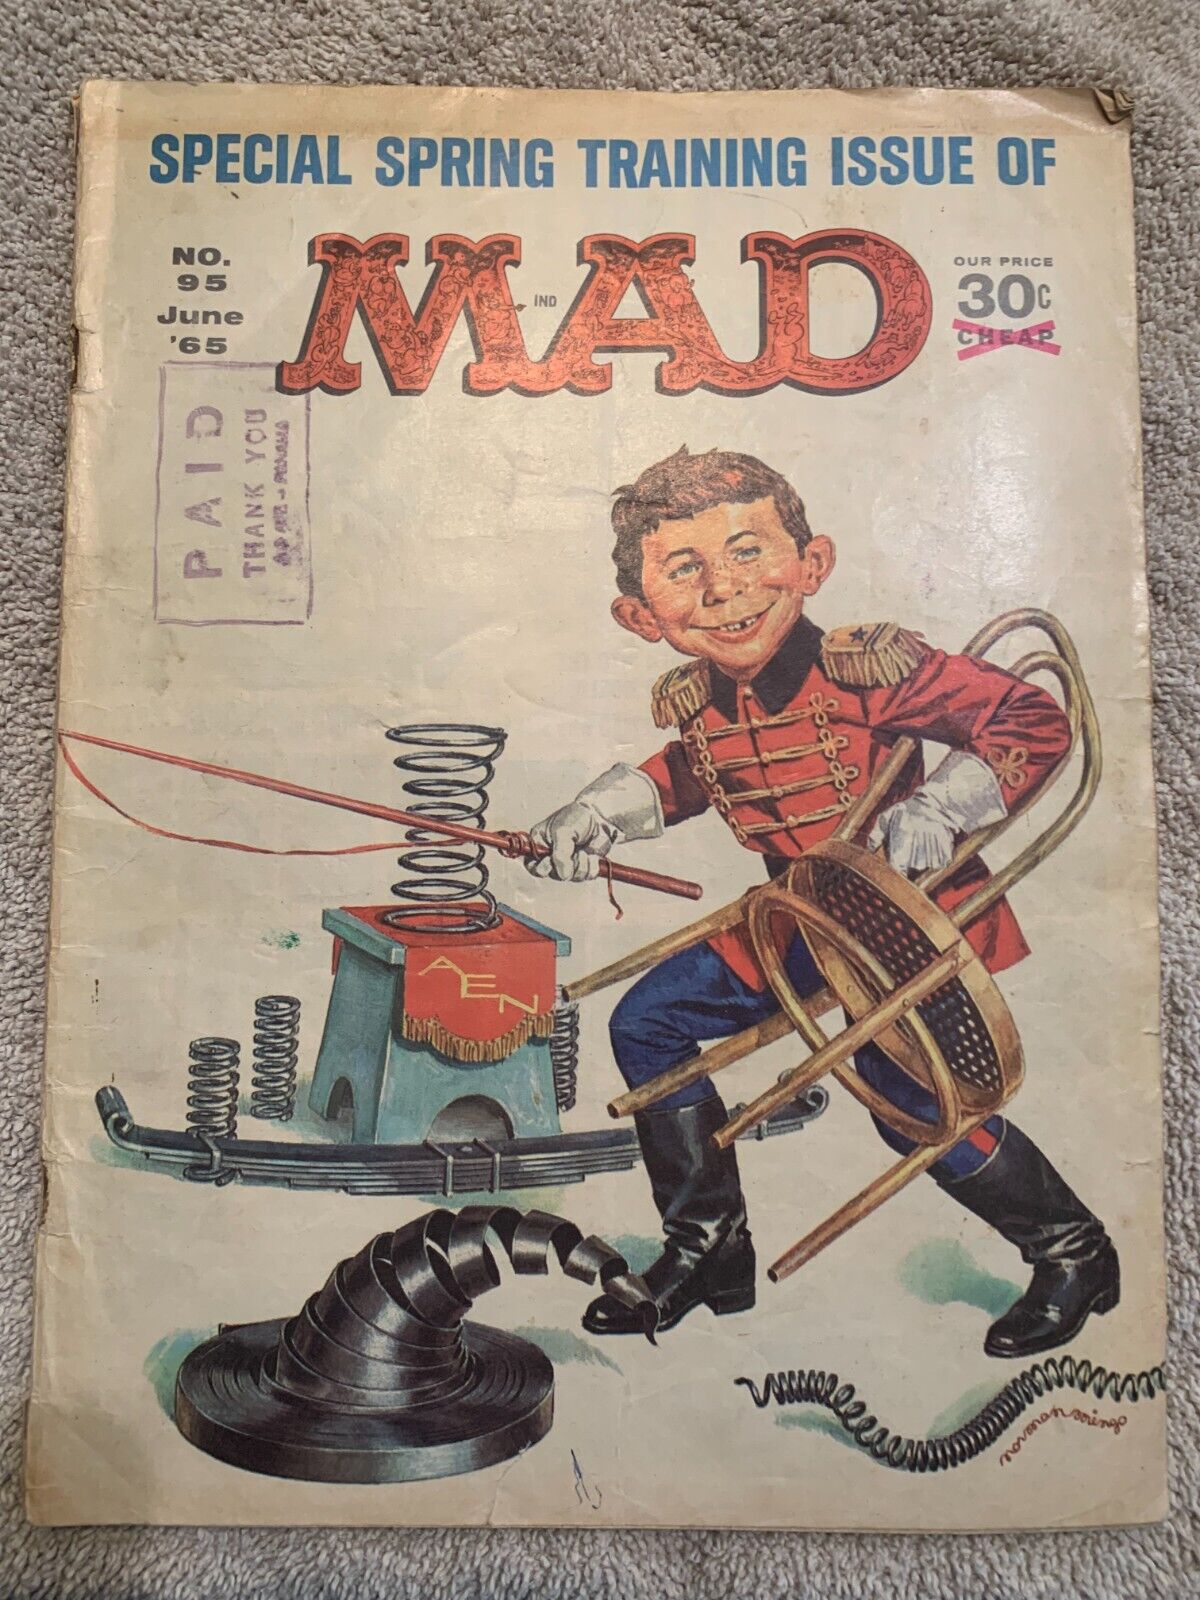 Vintage Mad Magazine #95 June 1965 Special Spring Training Issue